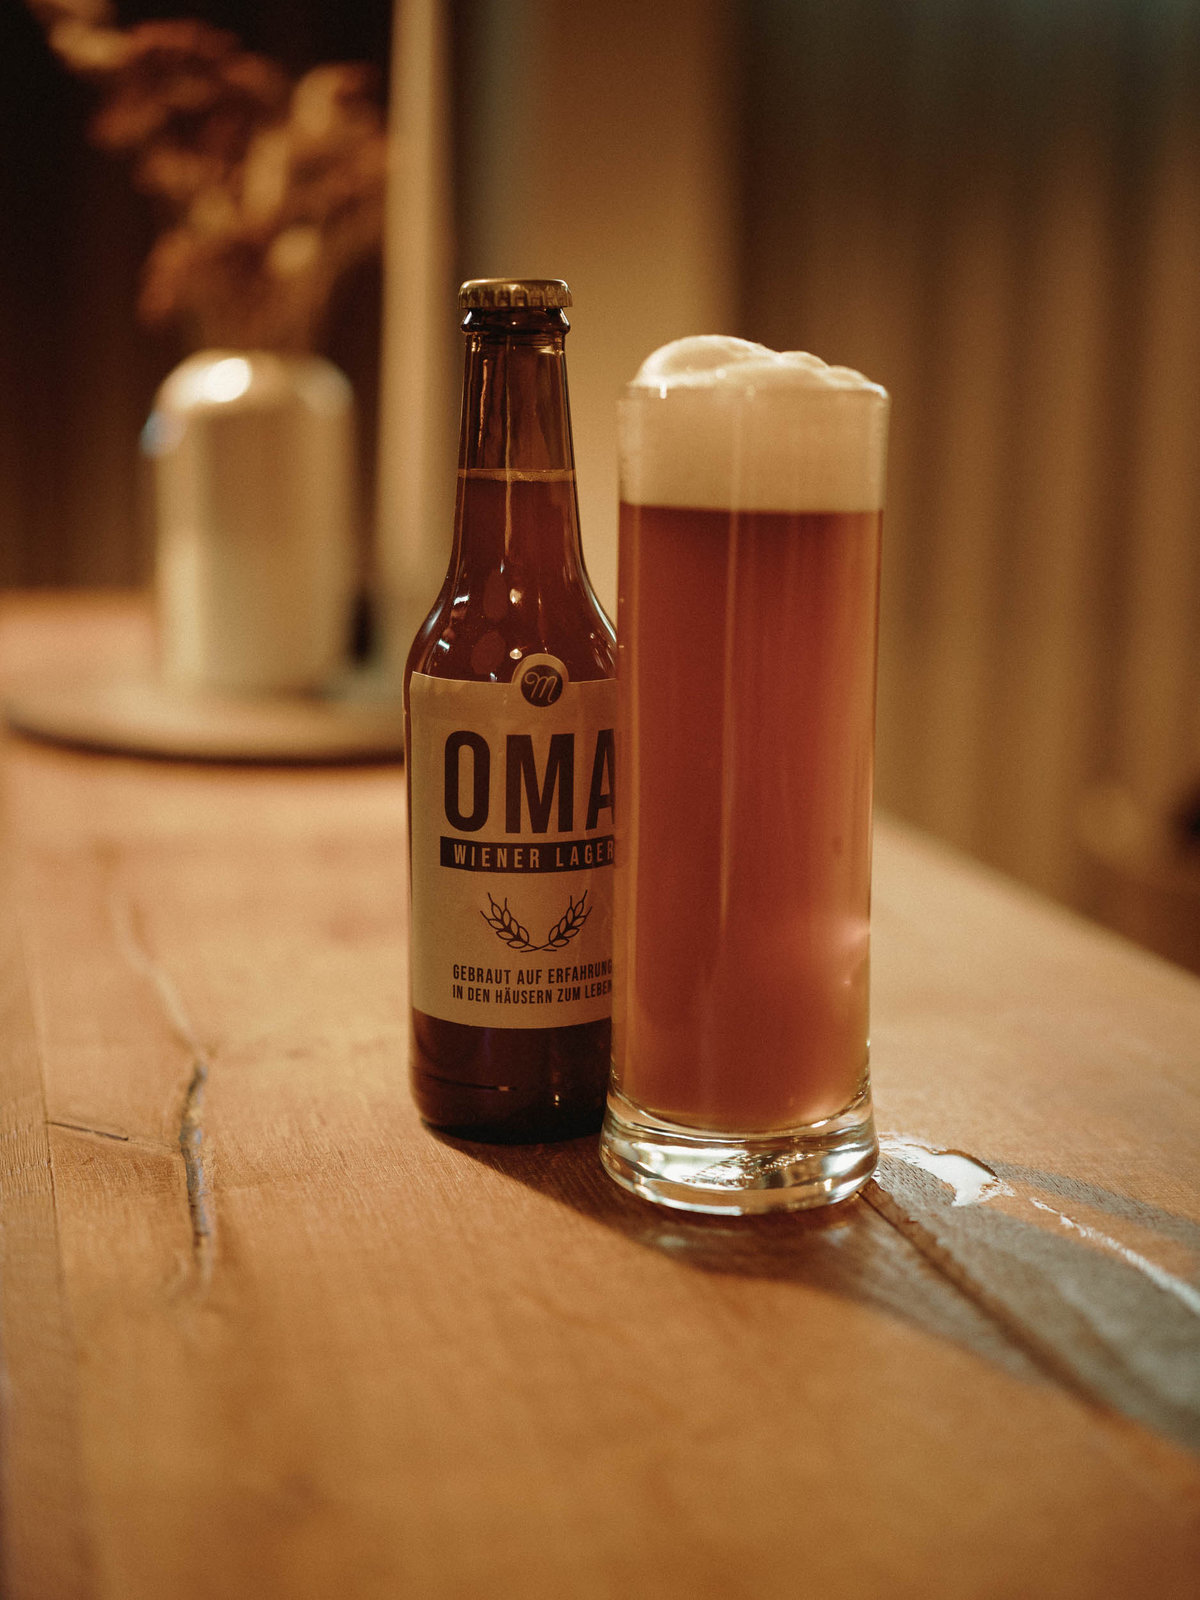 A bottle of Oma (“grandma”) Viennese lager.